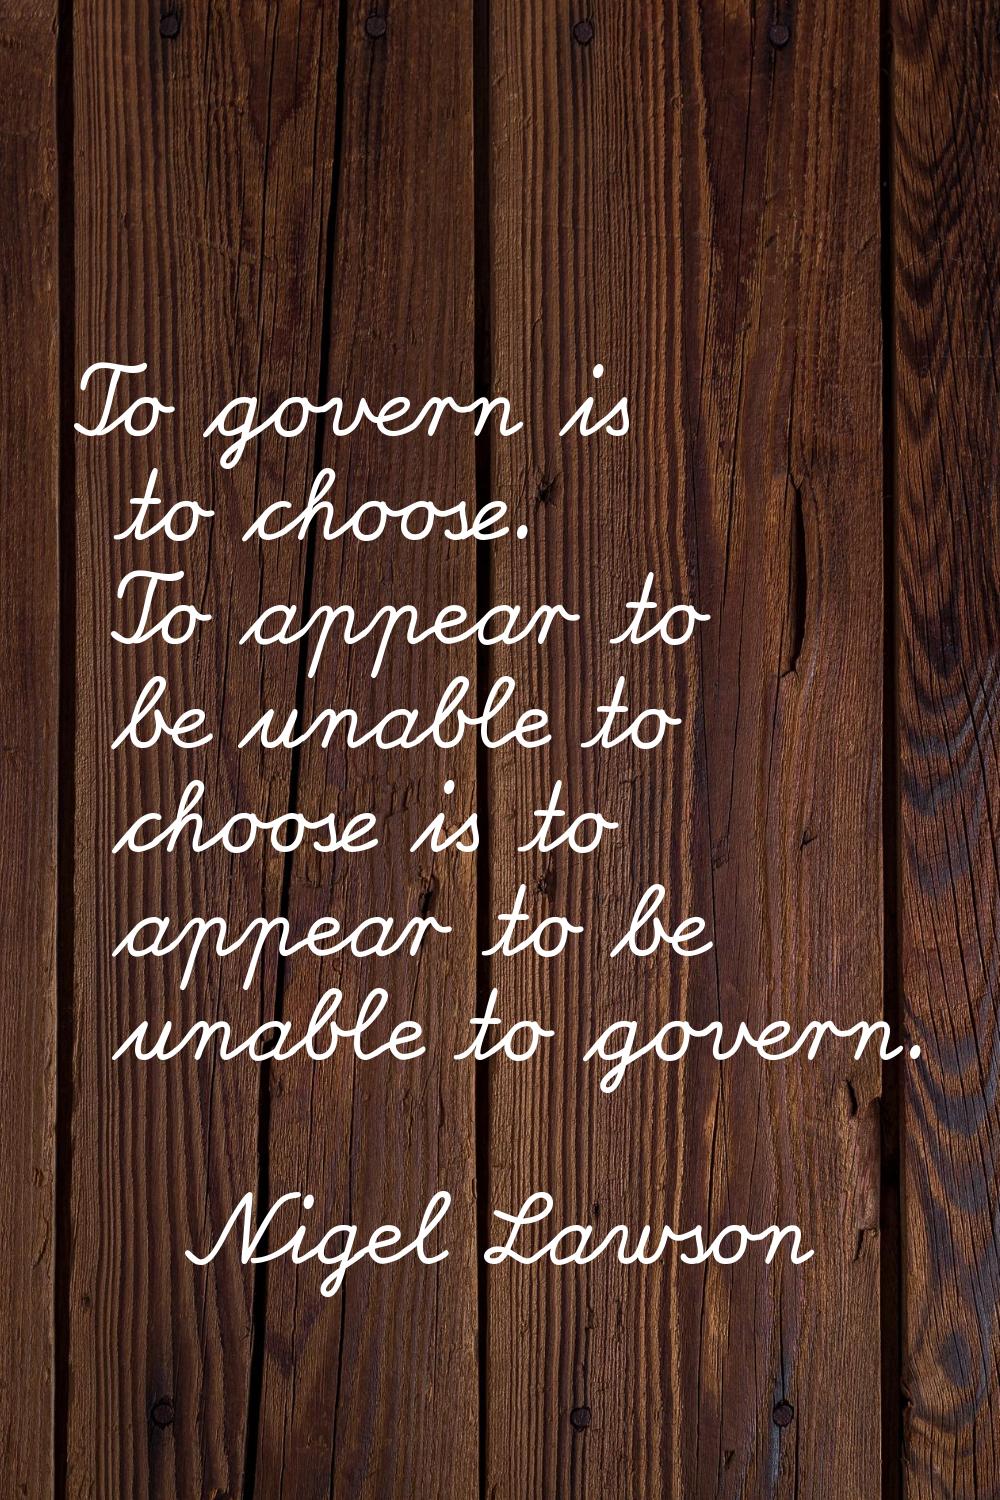 To govern is to choose. To appear to be unable to choose is to appear to be unable to govern.